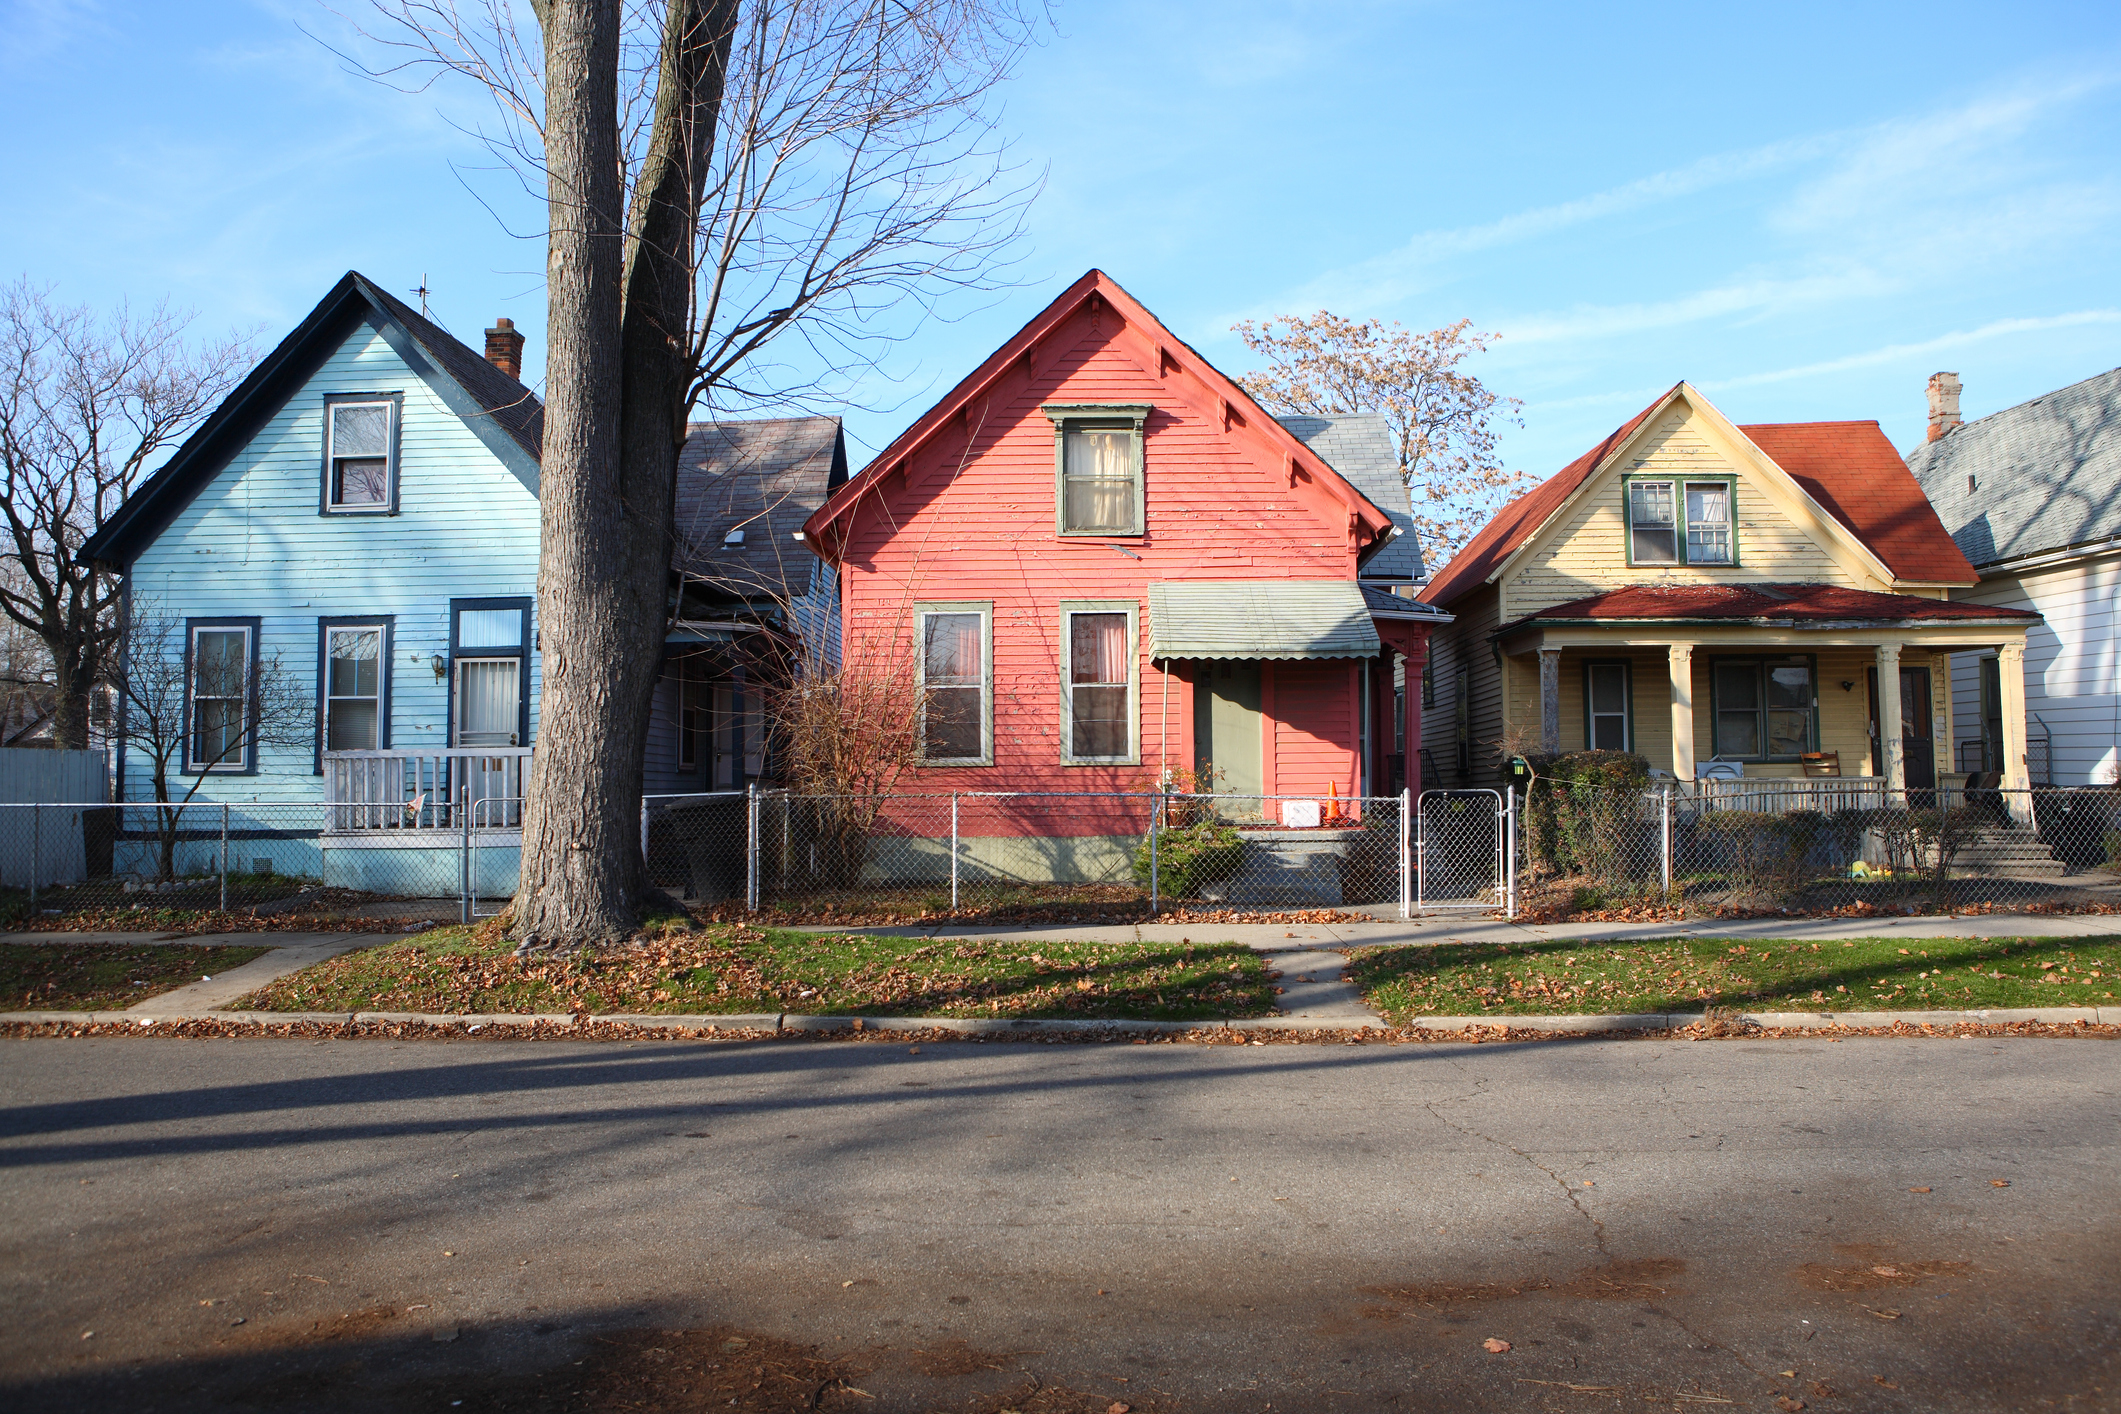 Black Homeowners In Detroit, MI, Have Gained Nearly $3B In Home Value, Report Says